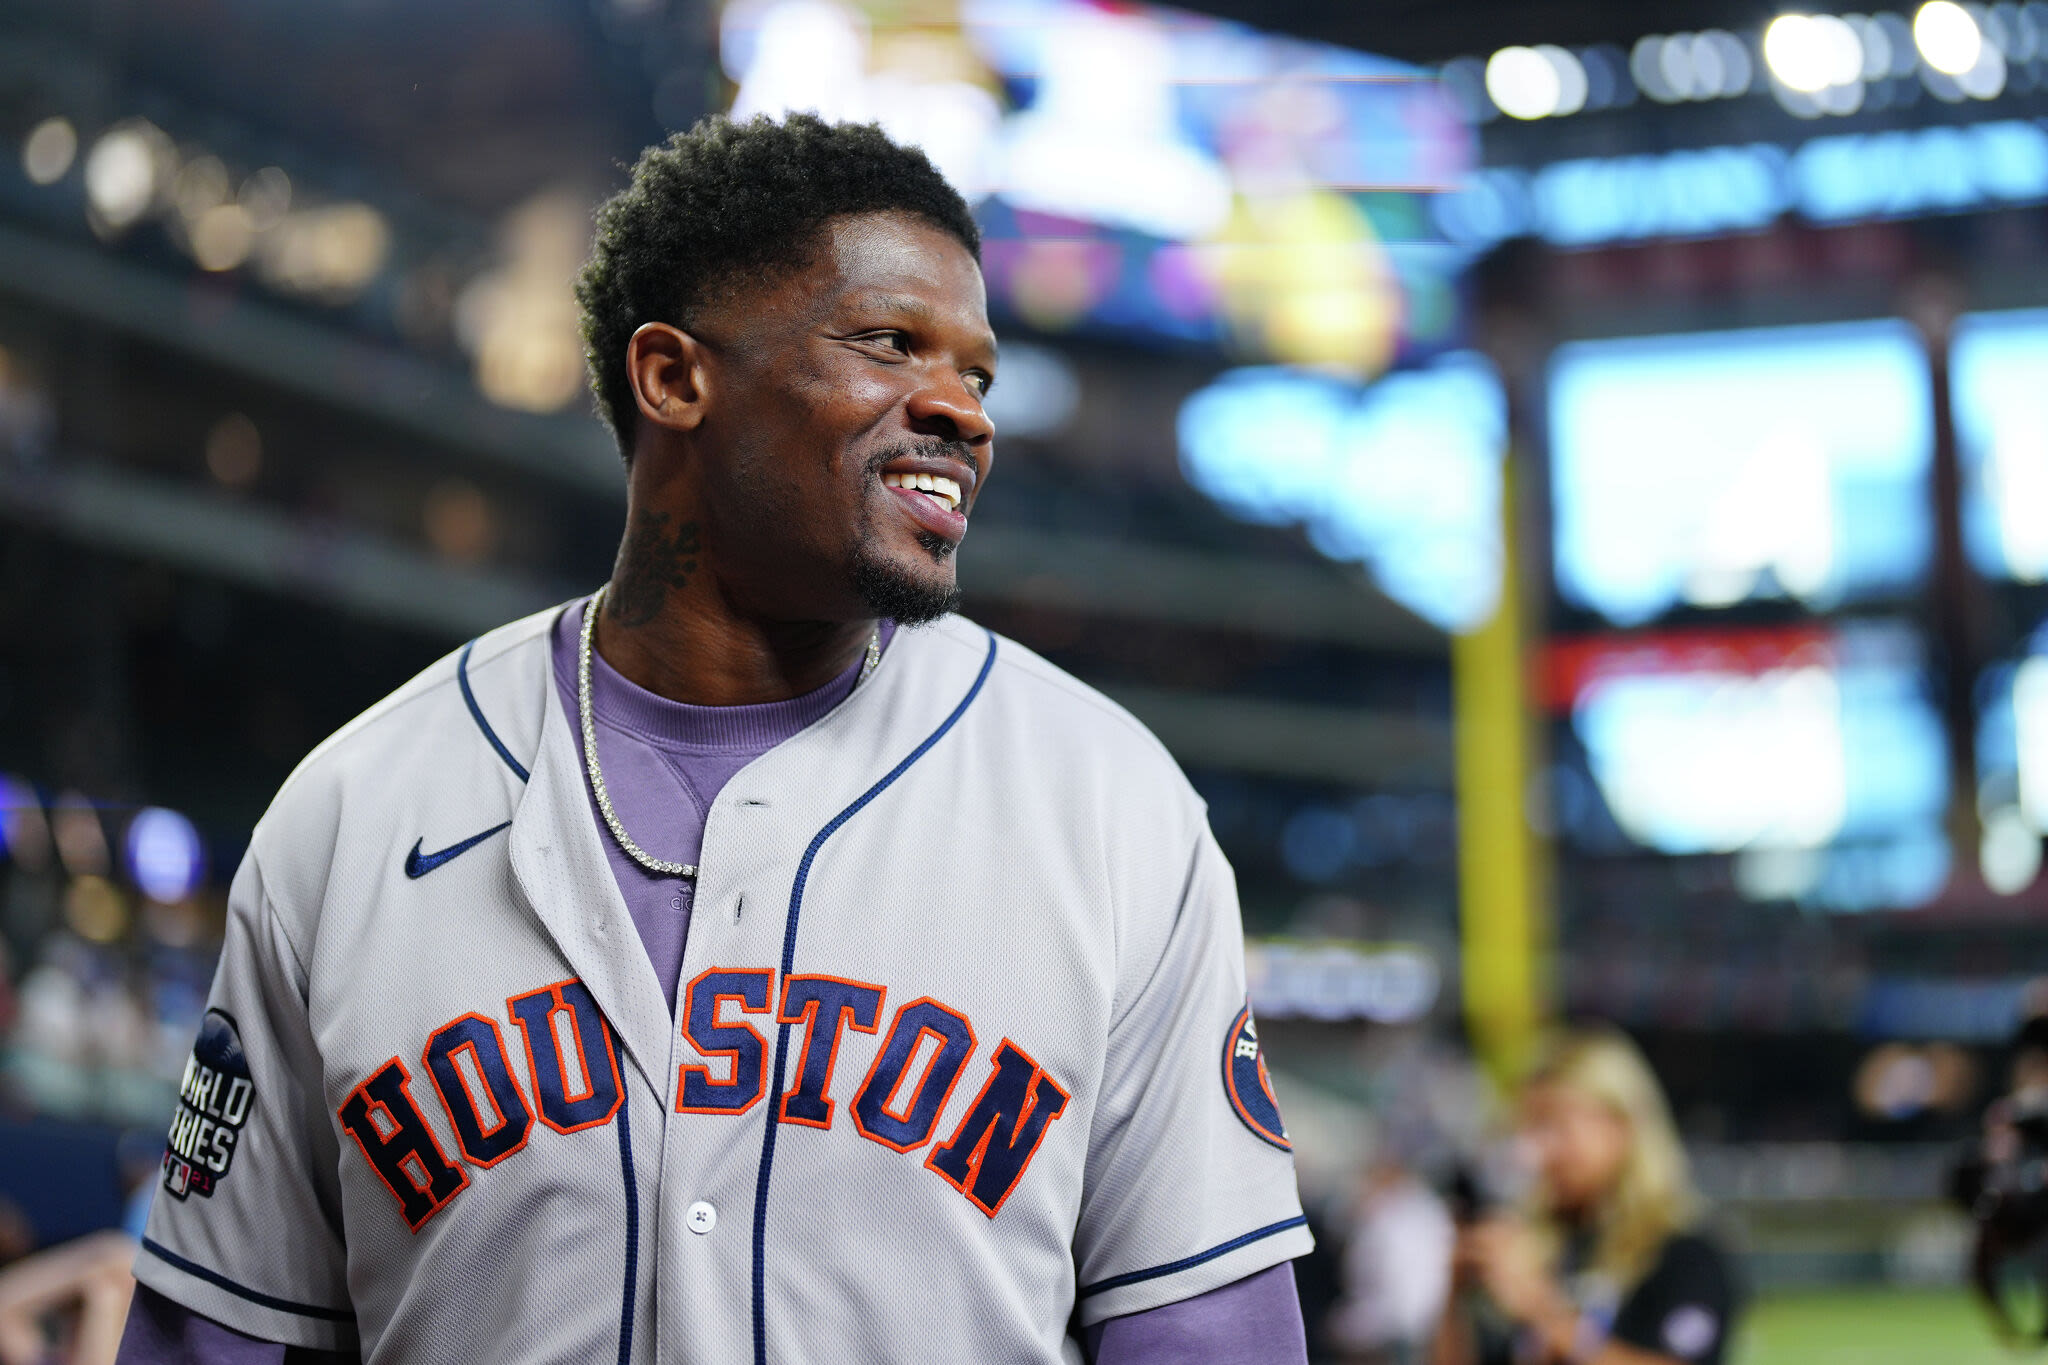 Astros' Andre Johnson Night is Houston's must-attend game of the year